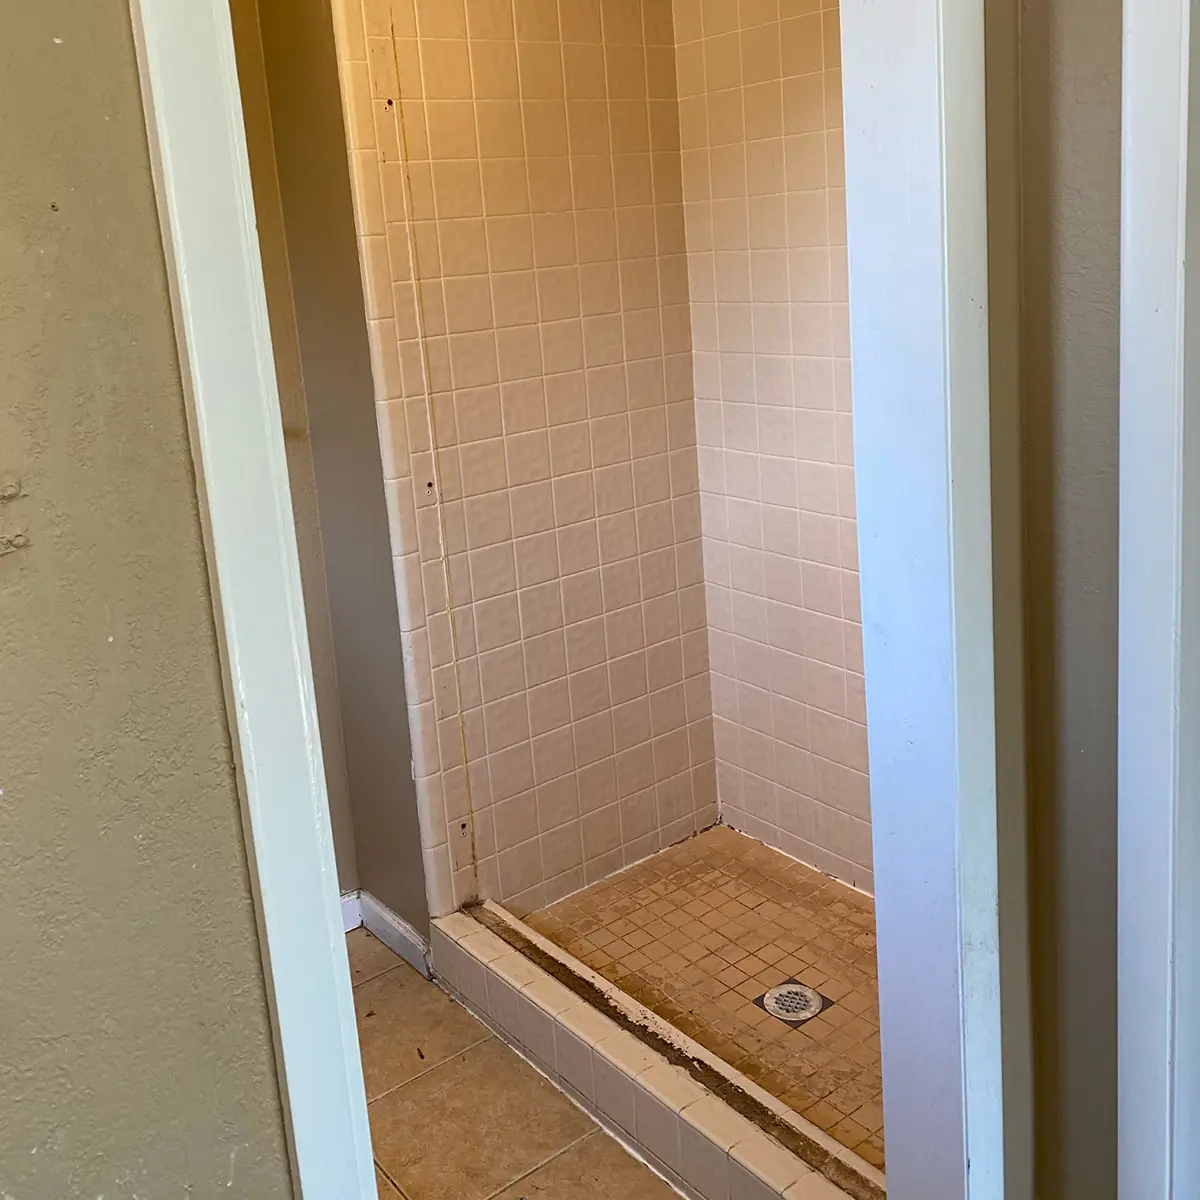 A bathroom remodel with a dated tiled shower being replaced